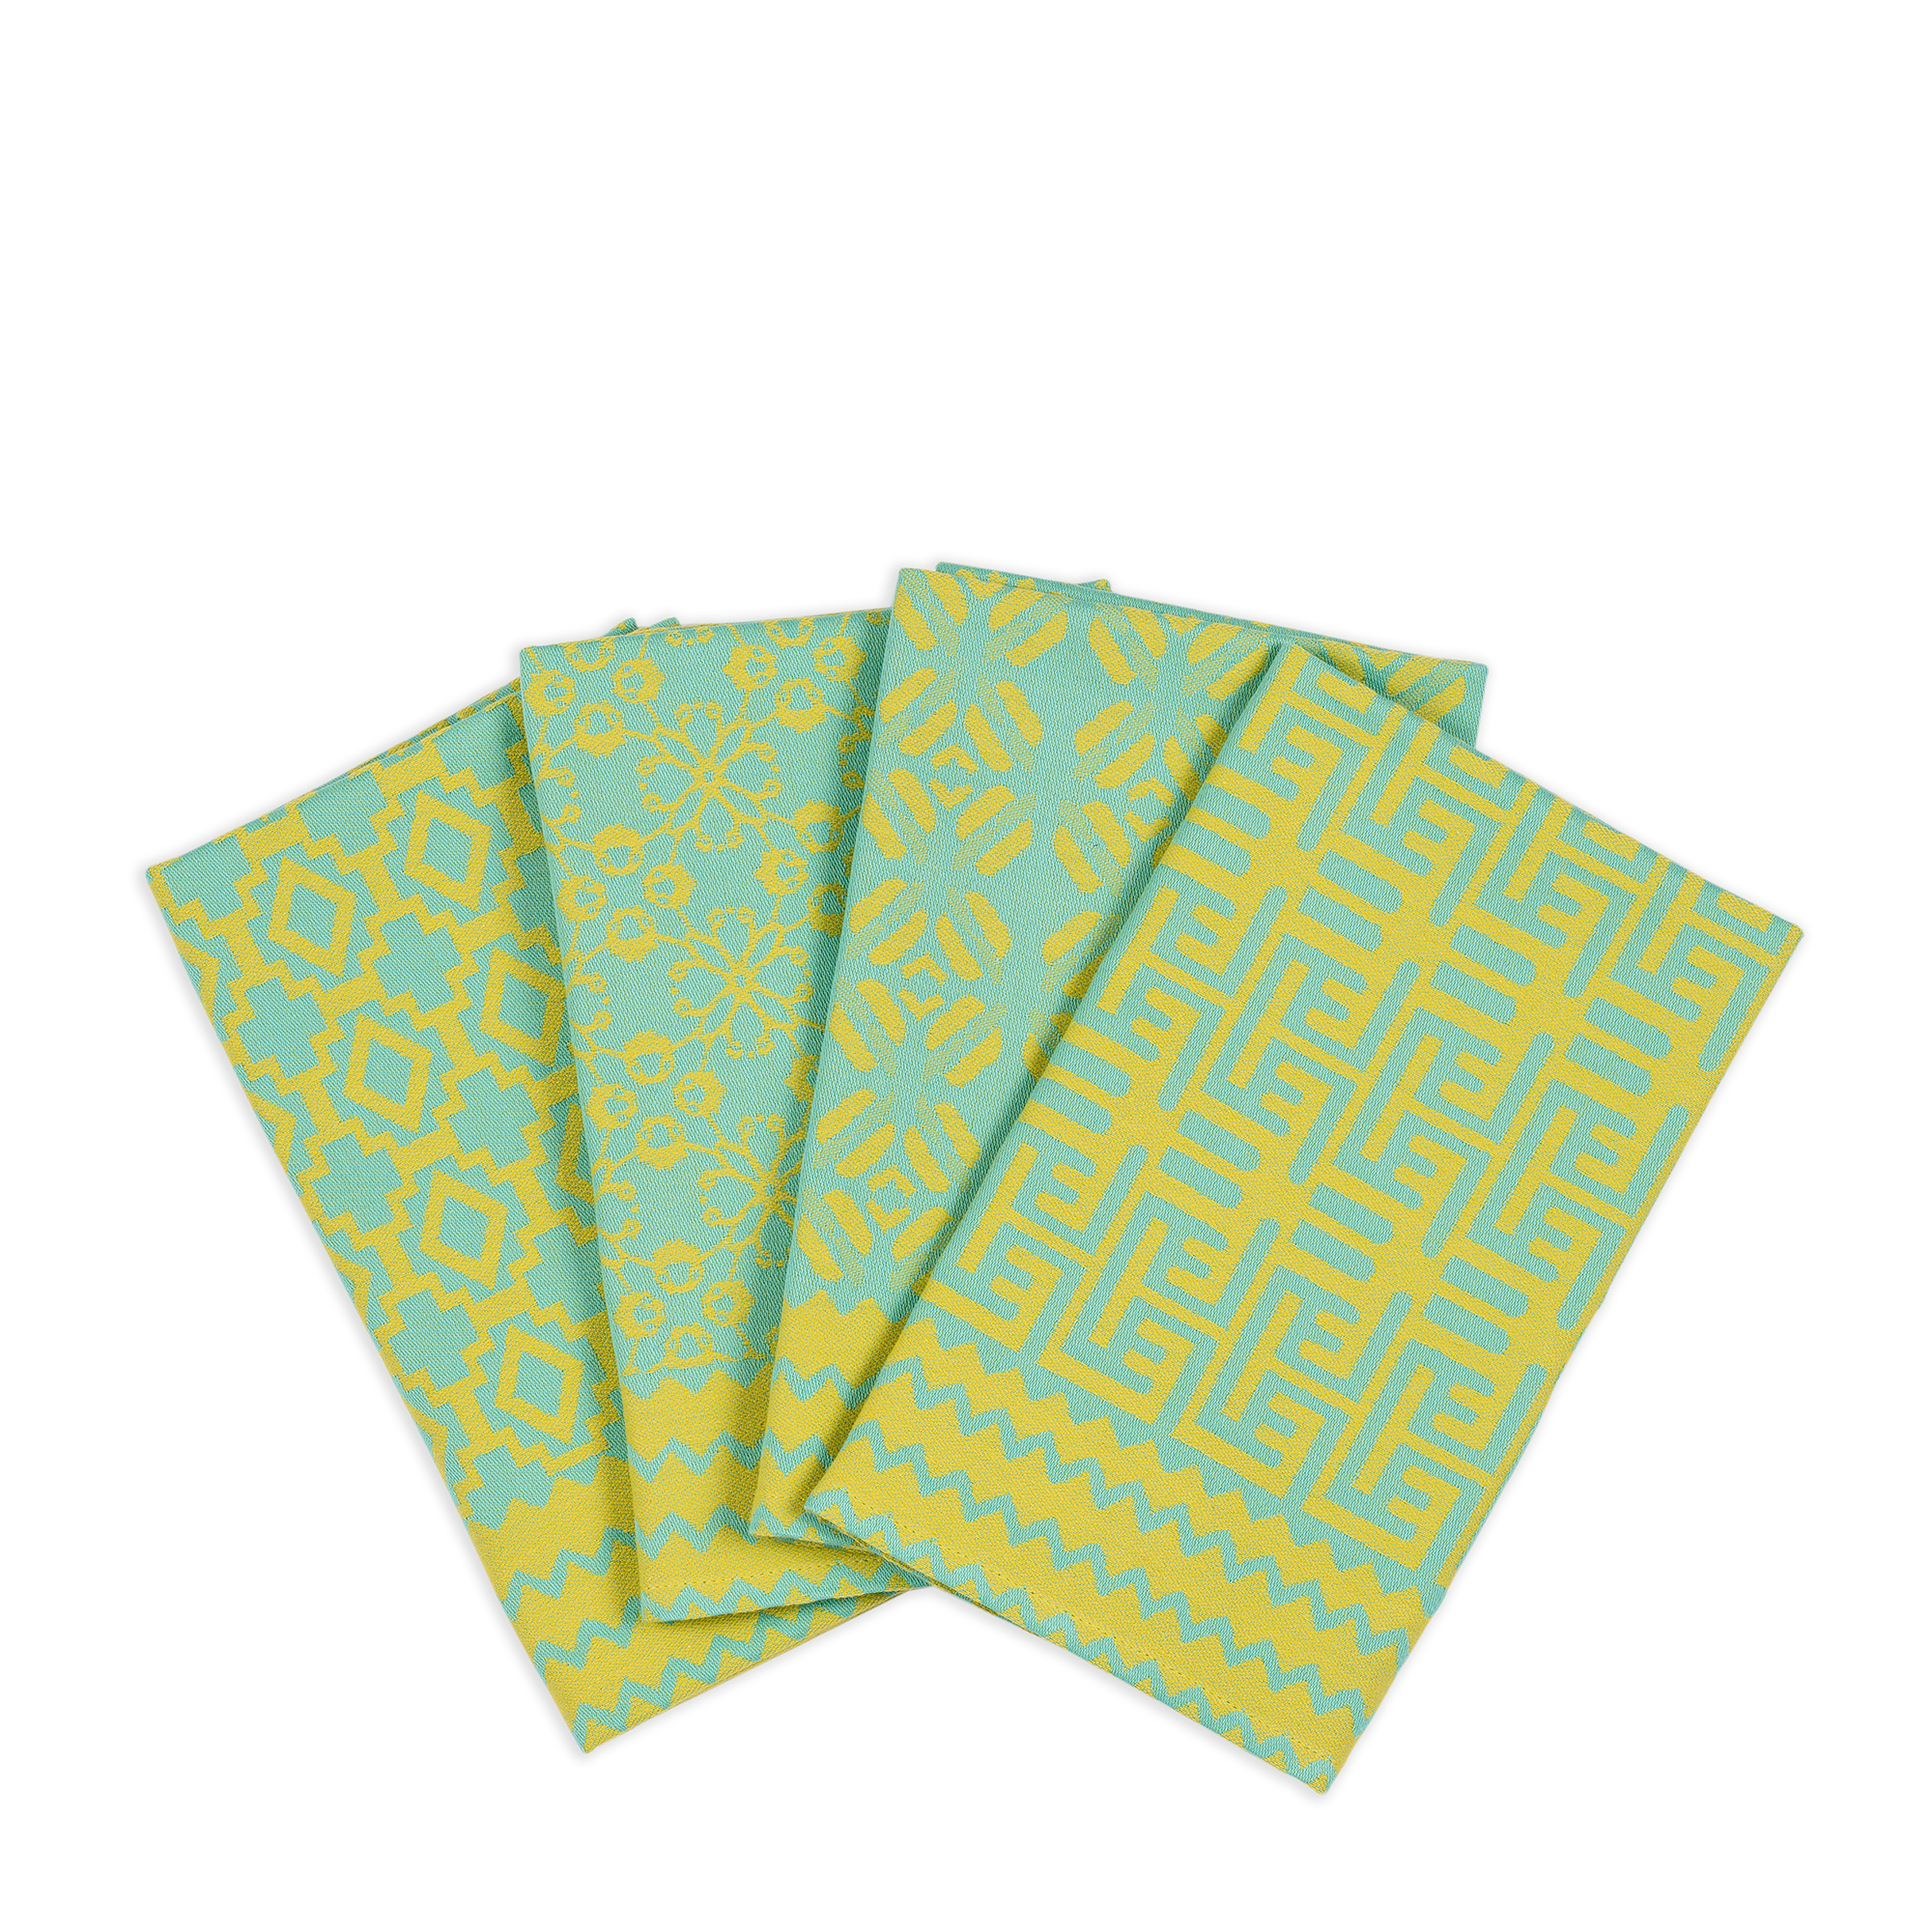 A set of four napkins in yellow and light green with a stunning array of African-inspired patterns, woven from 100% African cotton.